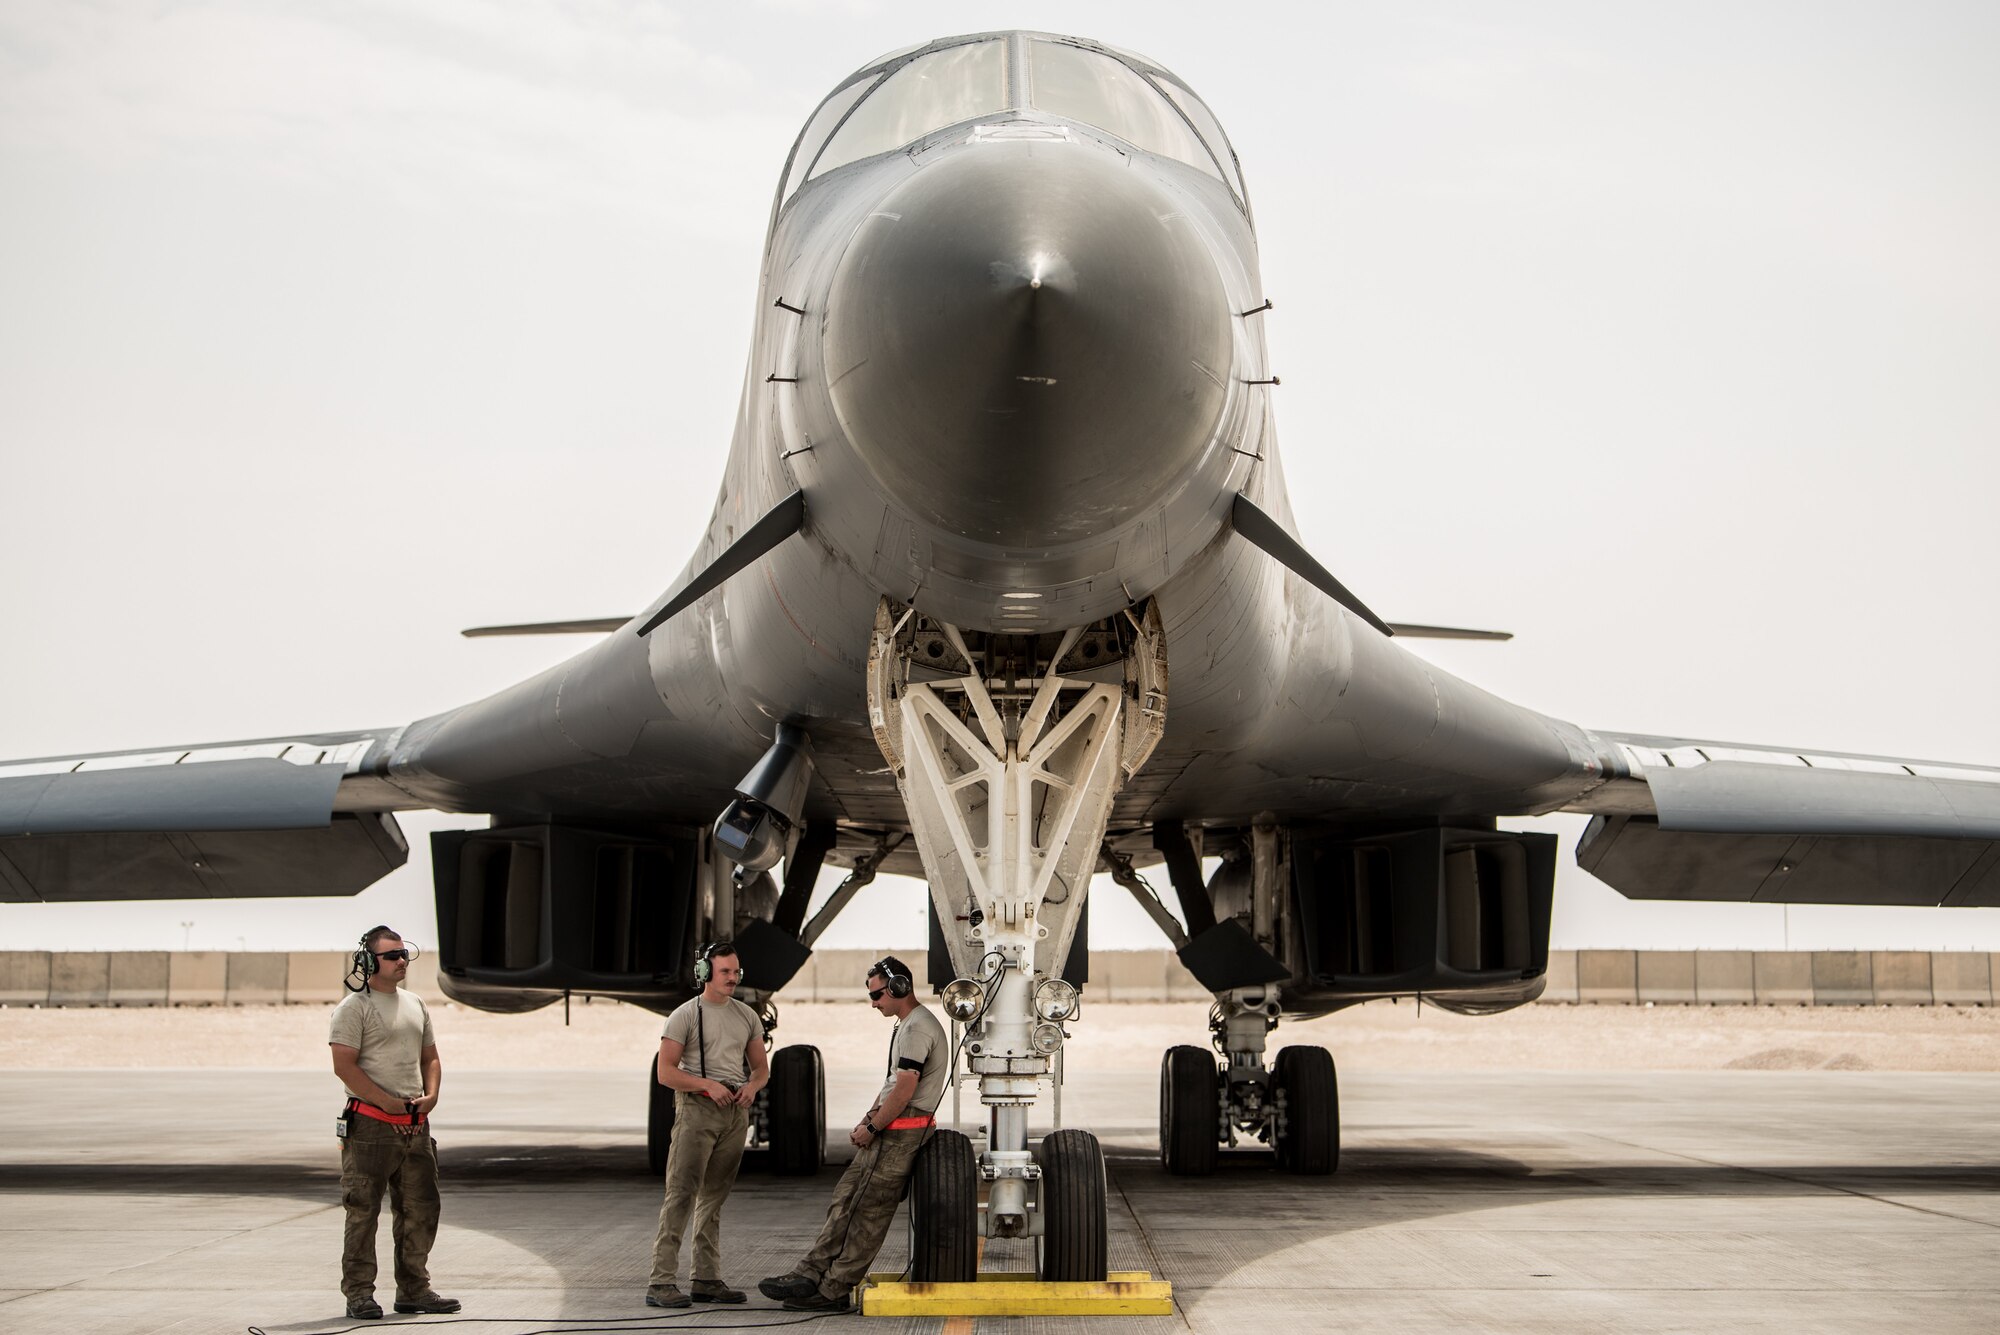 A 34th Expeditionary Bomb Squadron B-1B Lancer is prepared for departure at Al Udeid Air Base, Qatar, May 19, 2018. The reputable B-1 returned to the area of operations in April to combat Taliban and other terrorist groups after two years of supporting the United States Pacific Command’s AOR. (U.S. Air Force photo by 1st Lt. Katie Spencer)